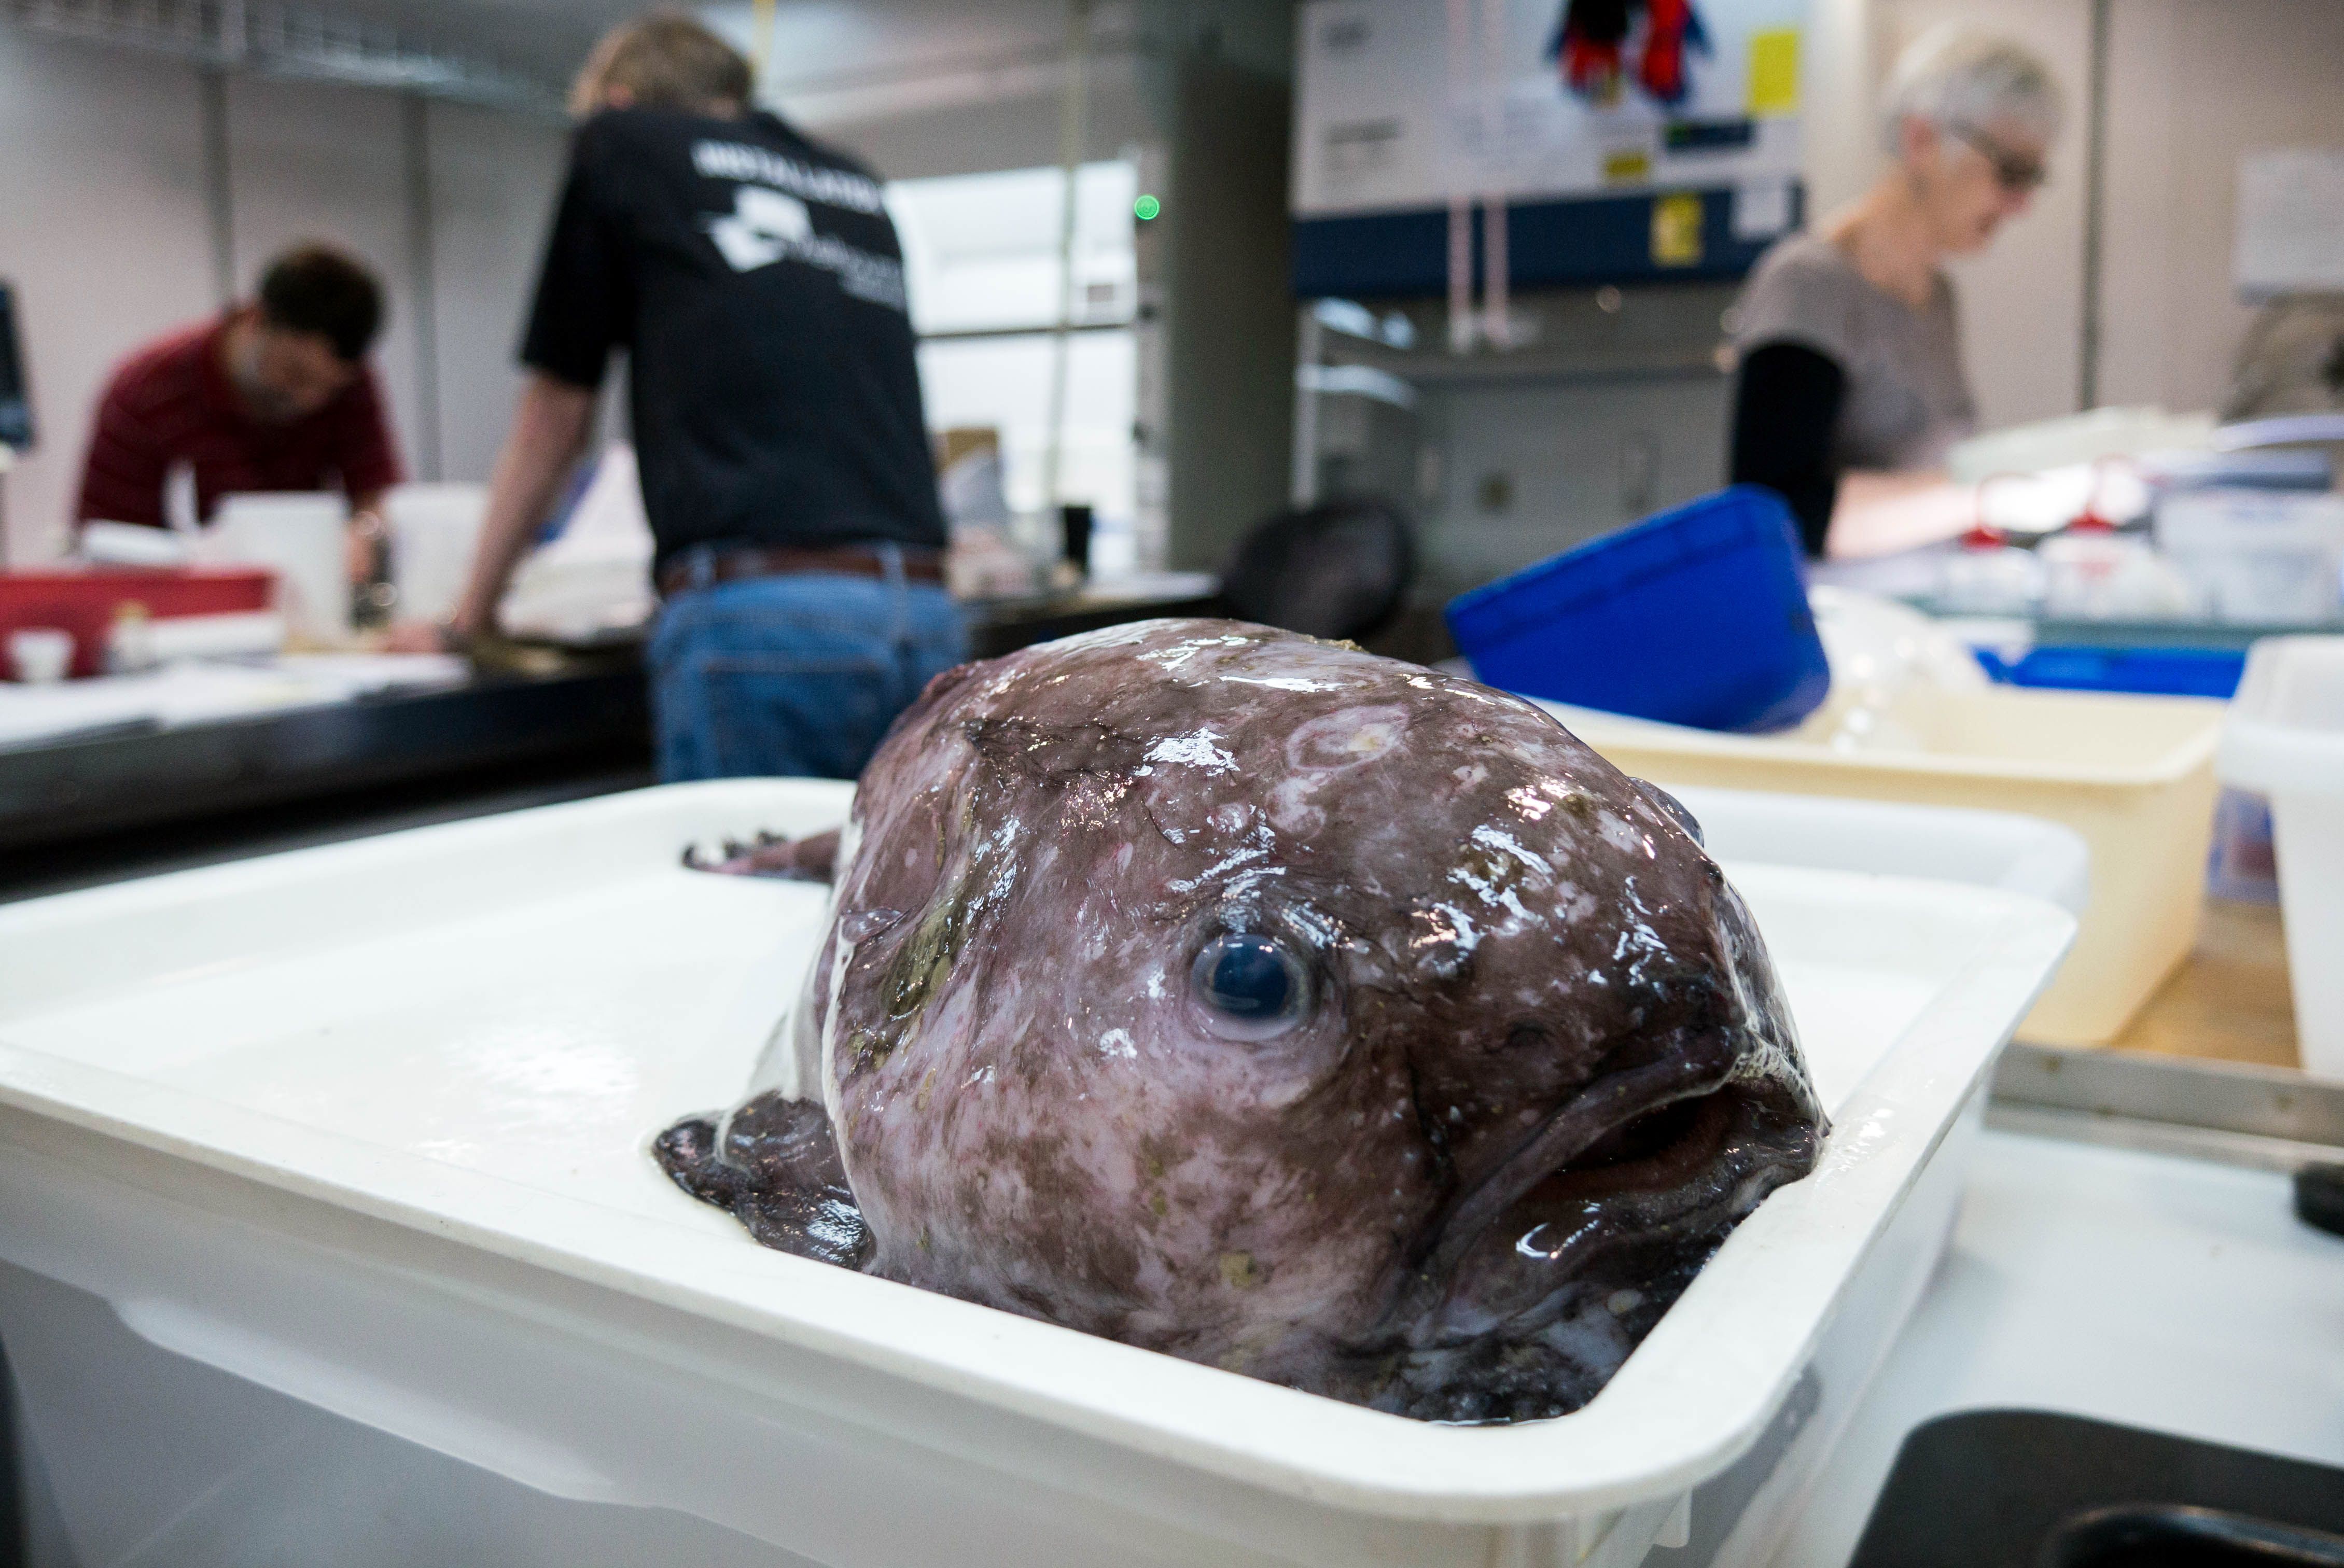 TOPSHOT - This undated handout picture released on February 21, 2018 by the Commonwealth Scientific and Industrial Research Organisation (CSIRO) and taken by Asher Flatt of the Marine National Facility in Hobart shows a blob fish, collected from a depth of 2.5 kilomenters off the New South Wales coast. More than 100 rarely seen fish species were hauled up from a deep and cold abyss off Australia during a scientific voyage, researchers said on February 21, including a cousin of the "world's ugliest animal" Mr Blobby. / AFP PHOTO / CSIRO / Asher FLATT / -----EDITORS NOTE --- RESTRICTED TO EDITORIAL USE - MANDATORY CREDIT "AFP PHOTO / CSIRO / ASHER FLATT" - NO MARKETING - NO ADVERTISING CAMPAIGNS - DISTRIBUTED AS A SERVICE TO CLIENTS - NO ARCHIVES